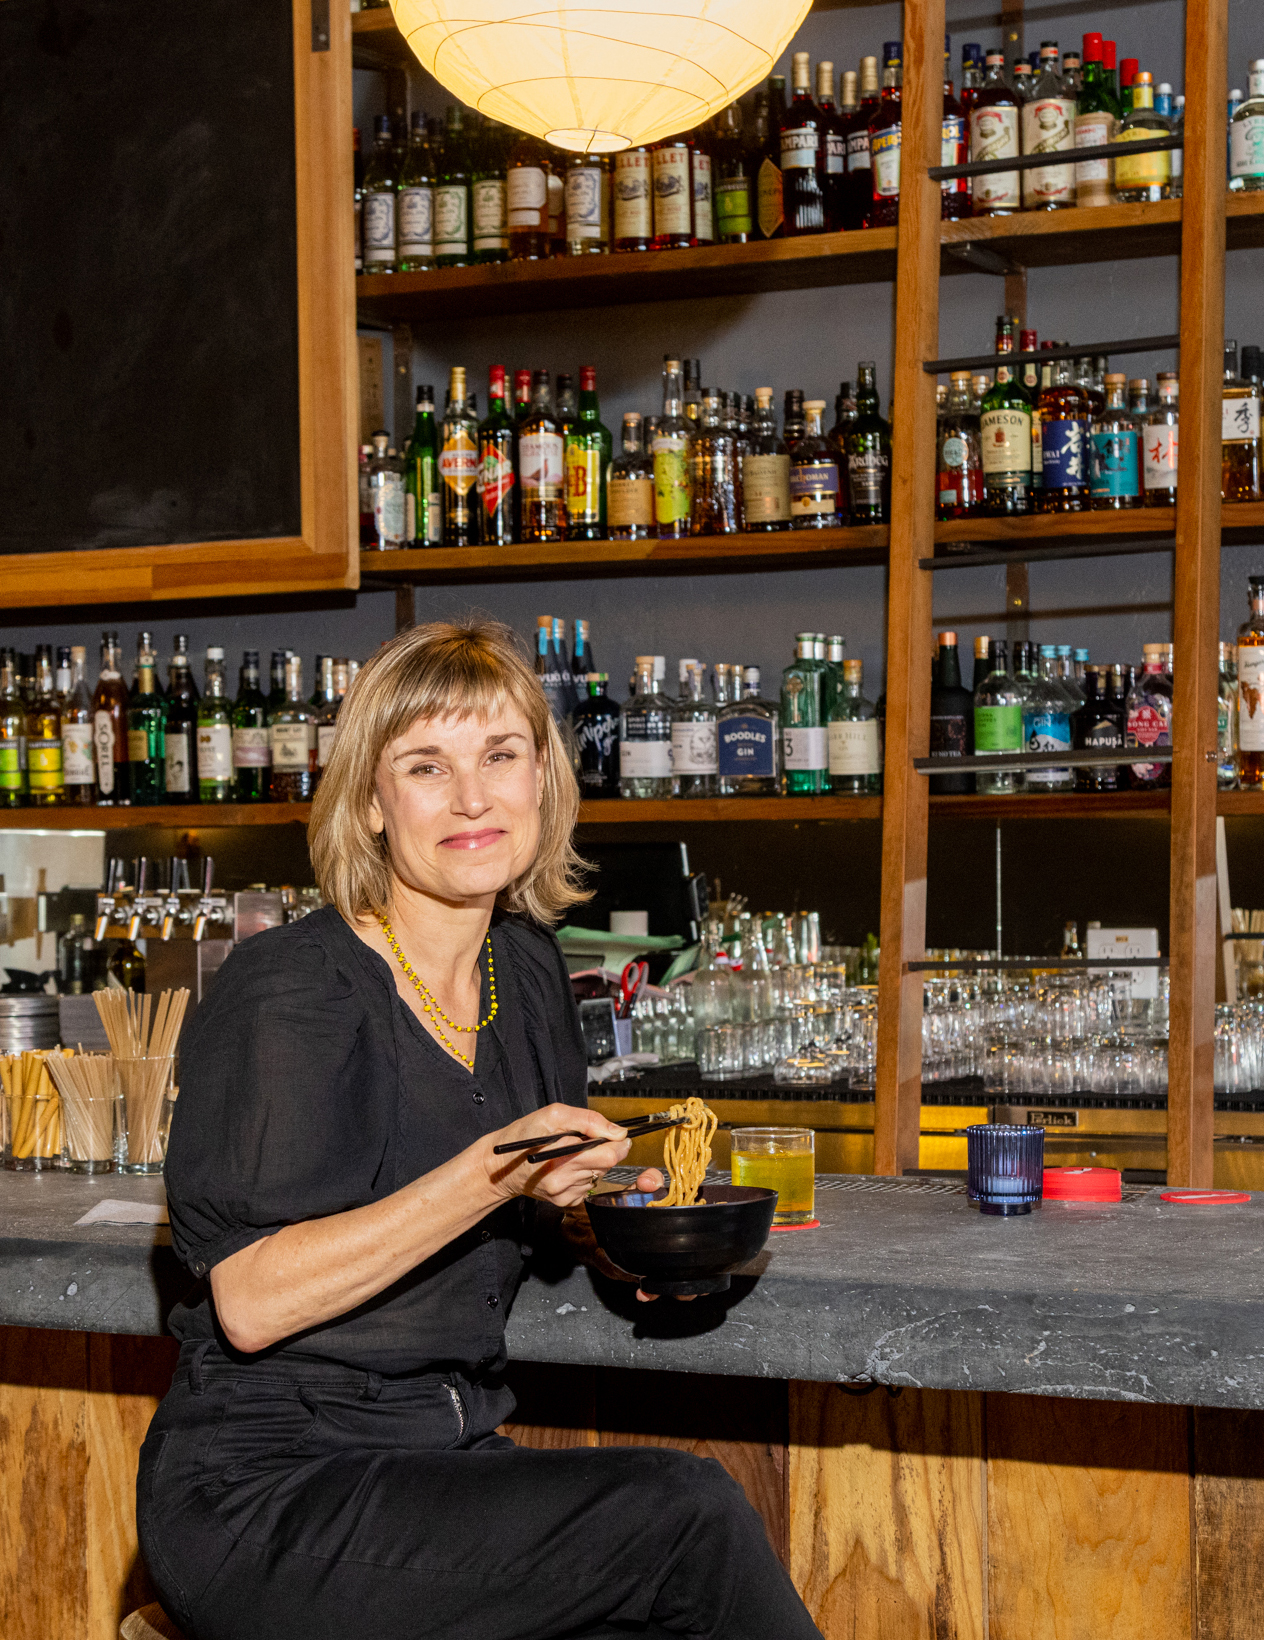 A woman is smiling, sitting at a bar with a bowl and chopsticks, shelves of liquor bottles behind her.